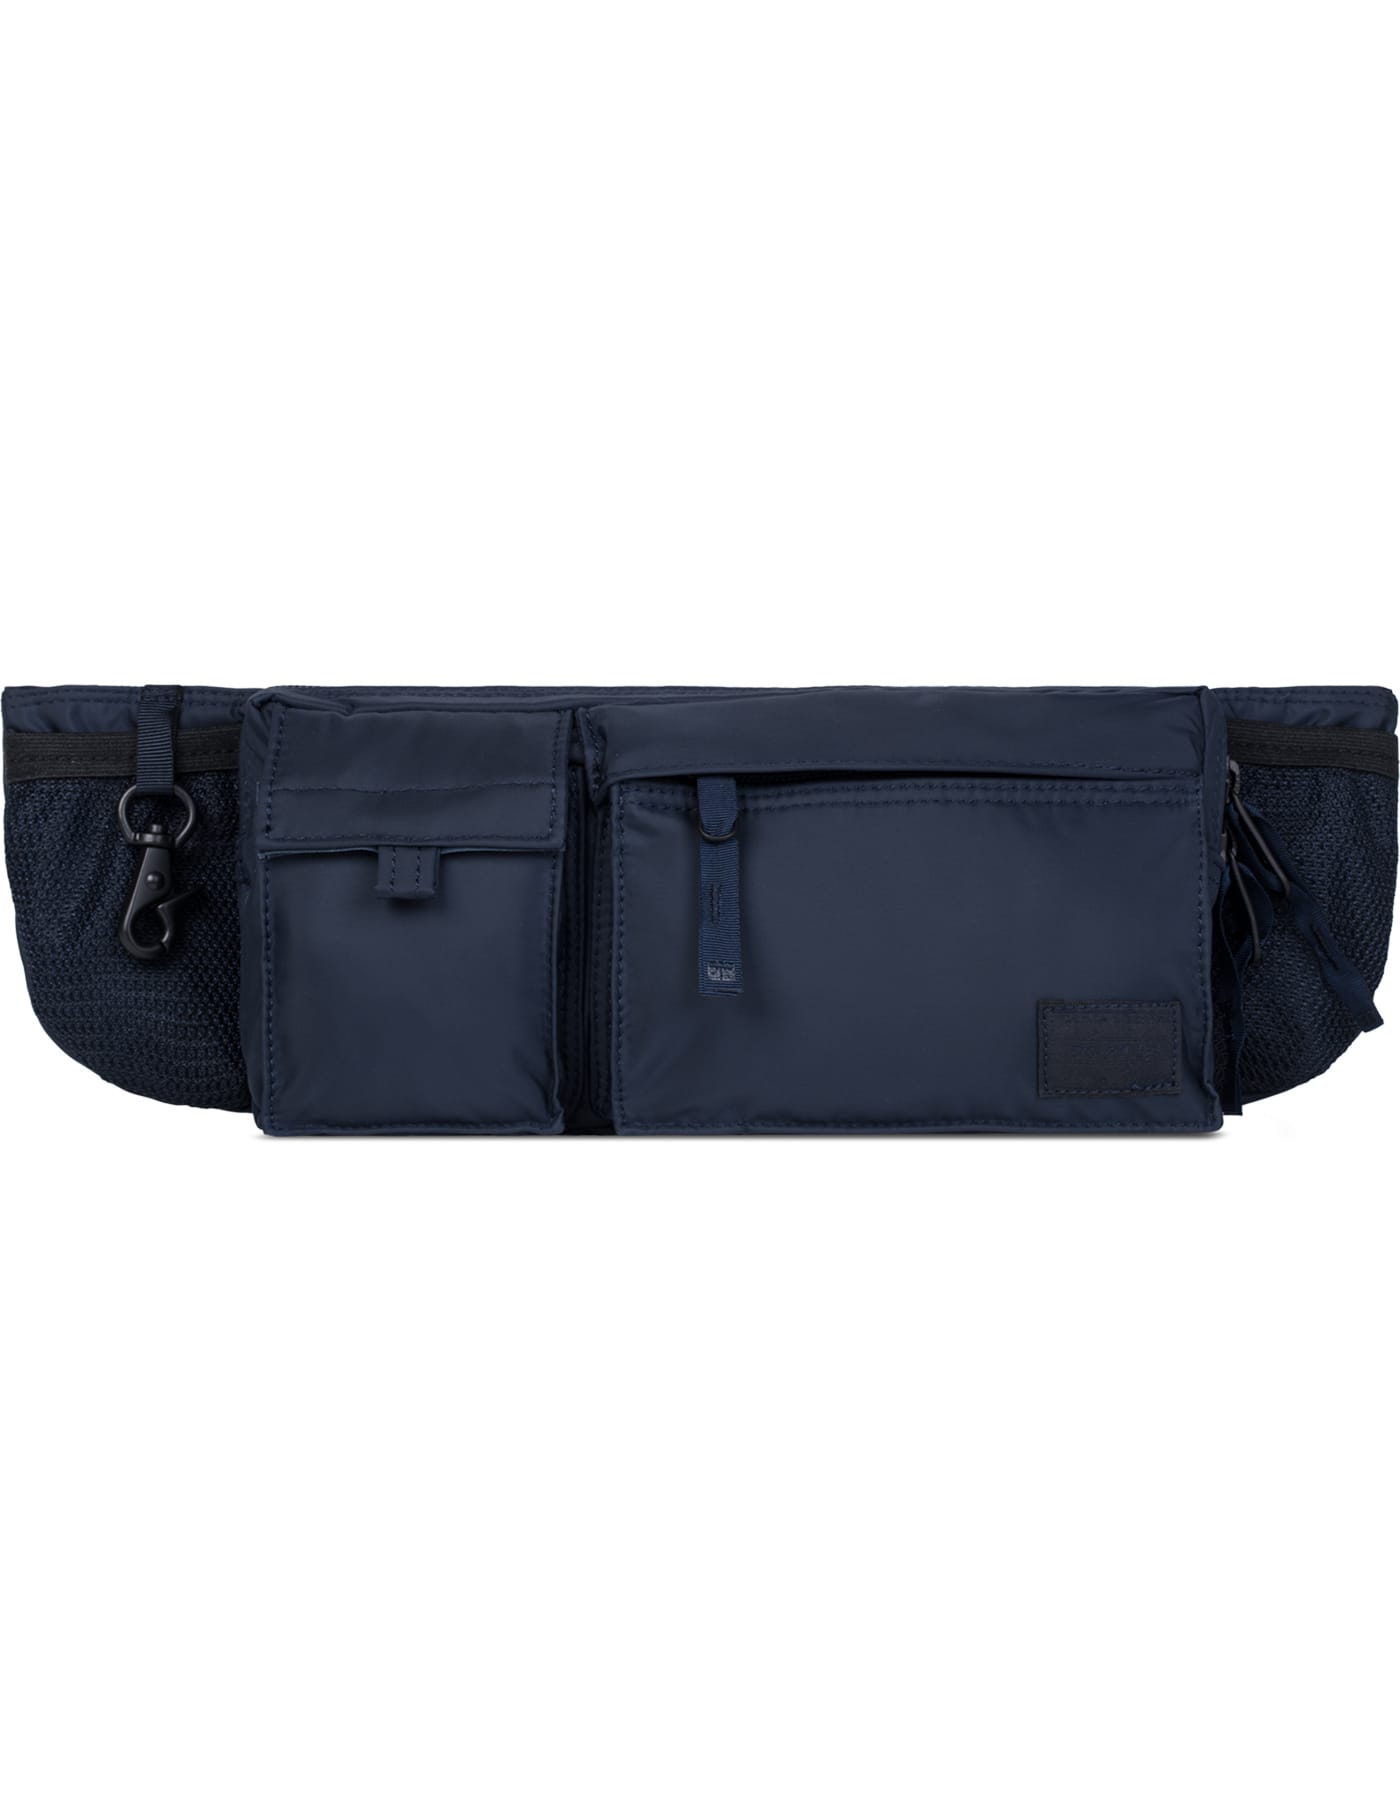 Head Porter - Master Navy Hip Bag | HBX - Globally Curated Fashion and  Lifestyle by Hypebeast